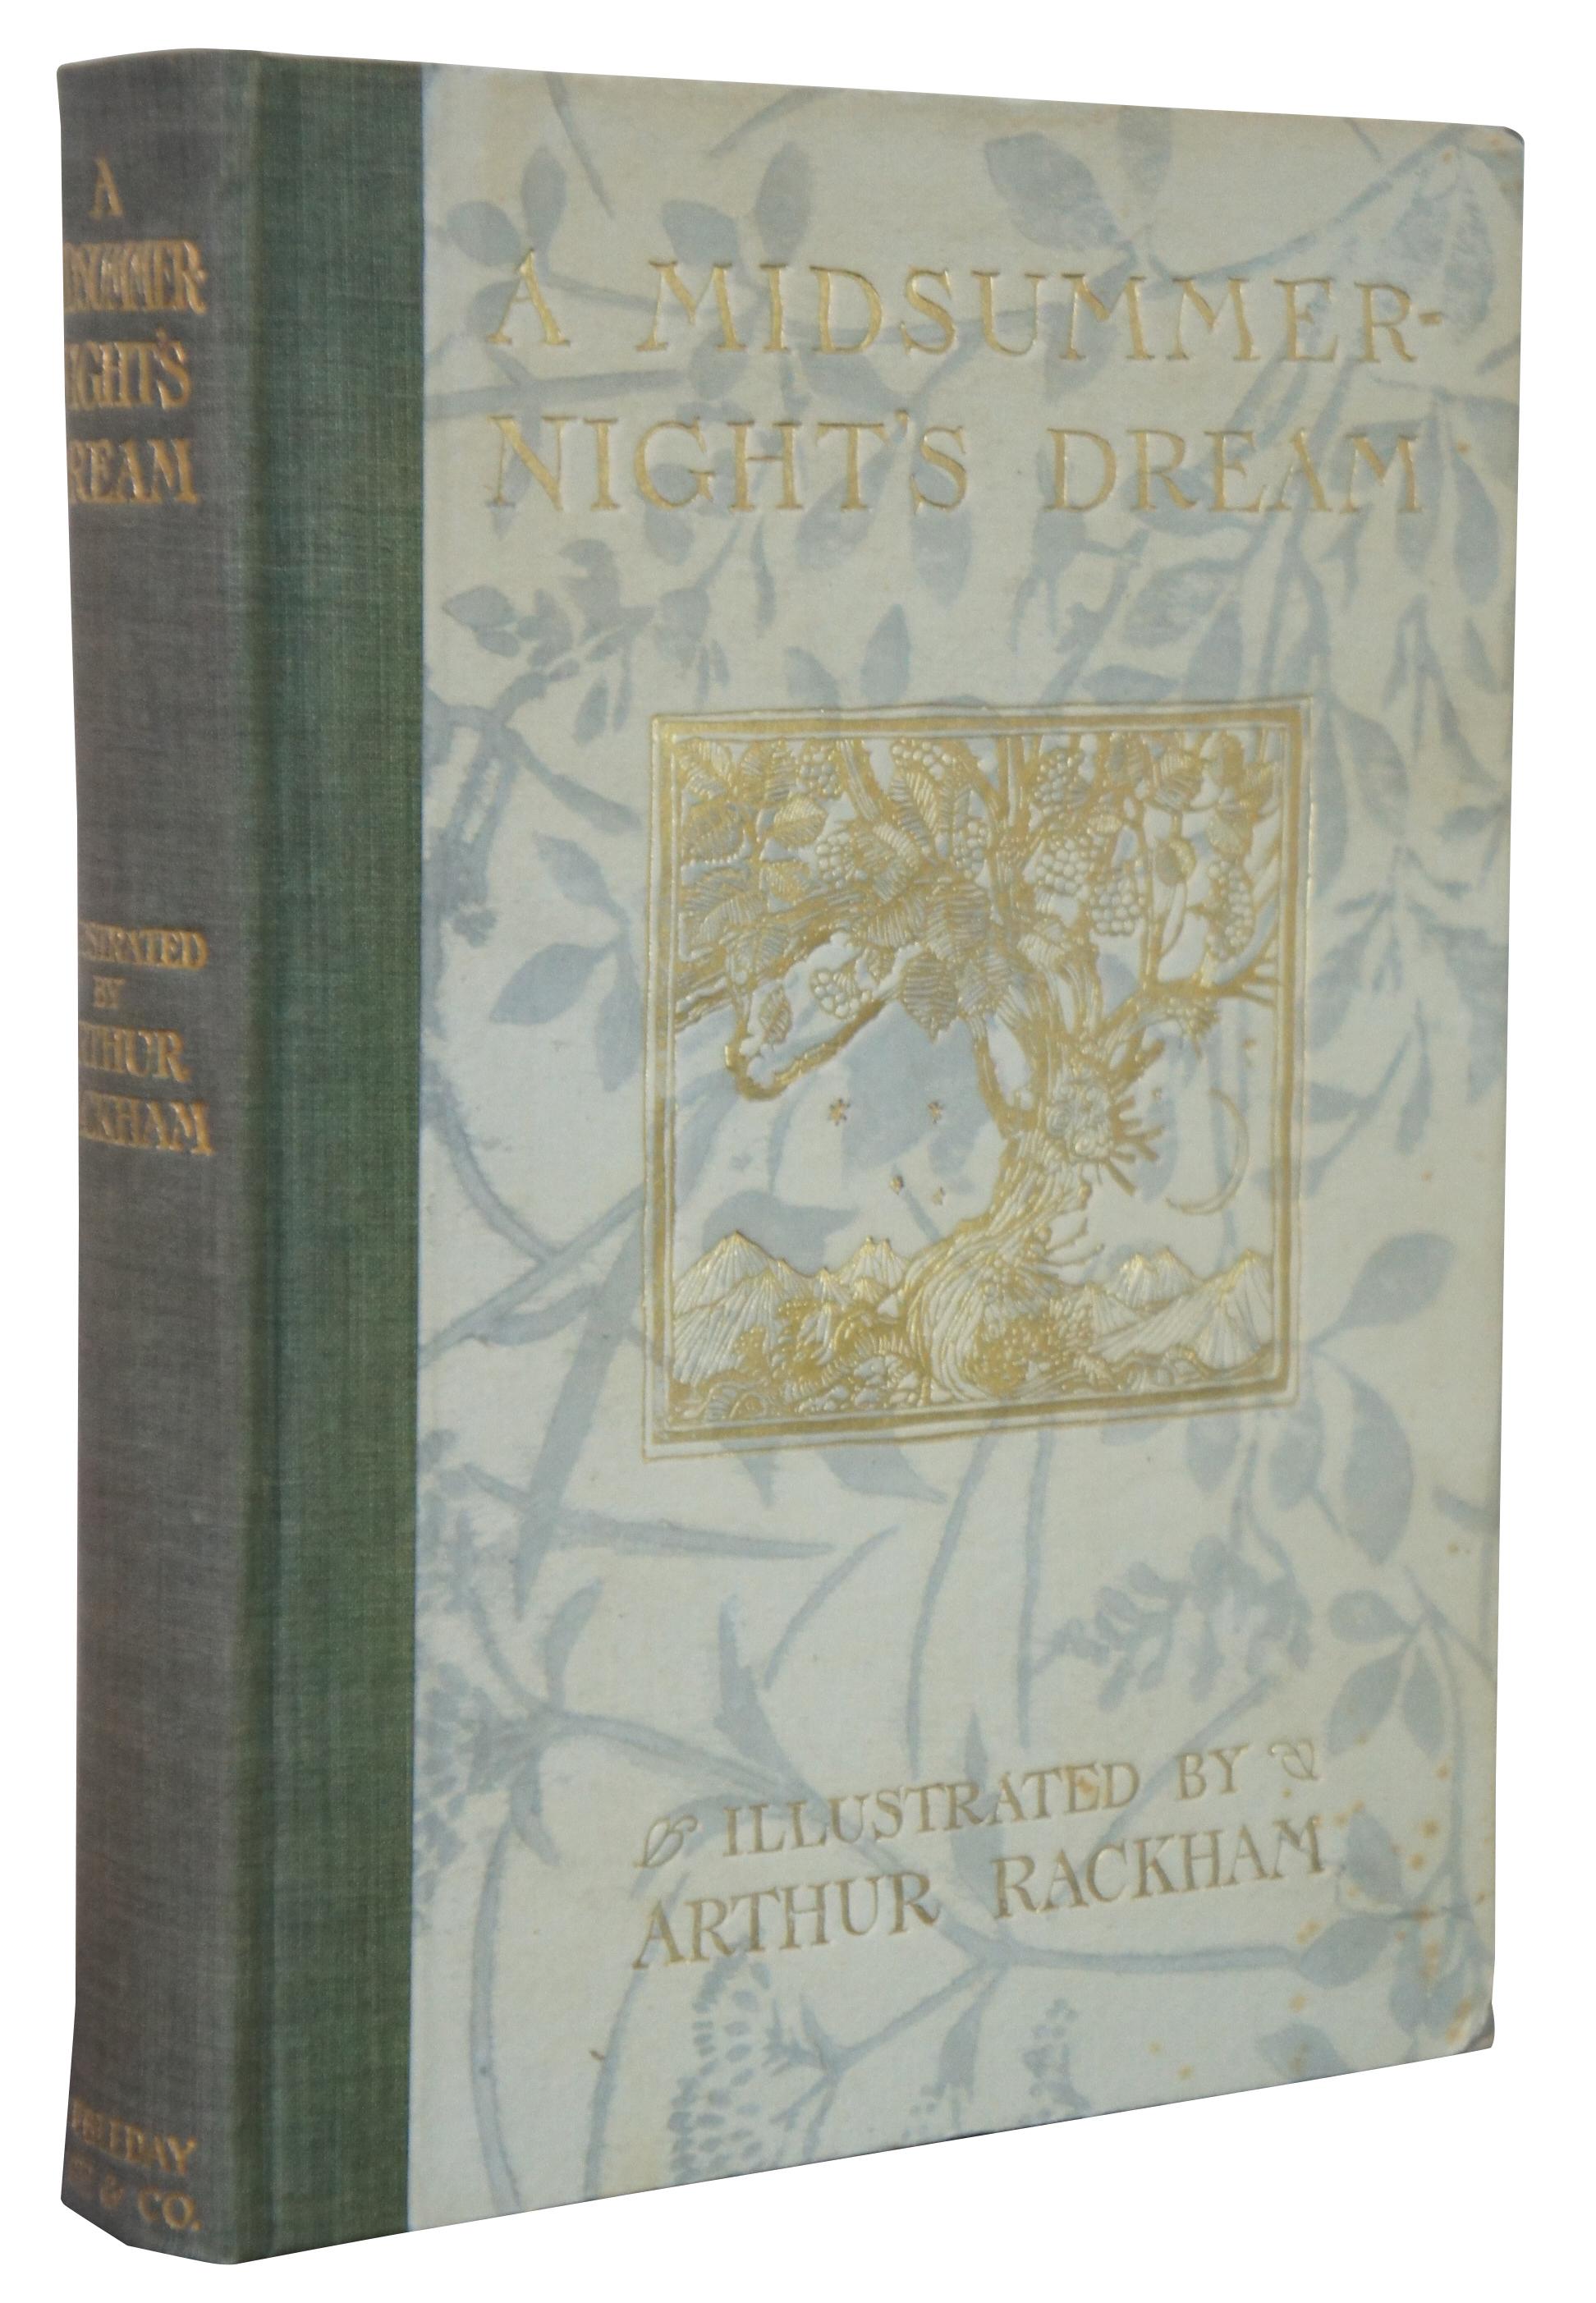 Antique hard cloth cover copy with slipcover box of “A Midsummer-Night’s Dream” by William Shakespeare with illustrations by Arthur Rackham, produced by William Heinemann, London and Doubleday, Page & Co, New York, 1908. First Trade Edition.